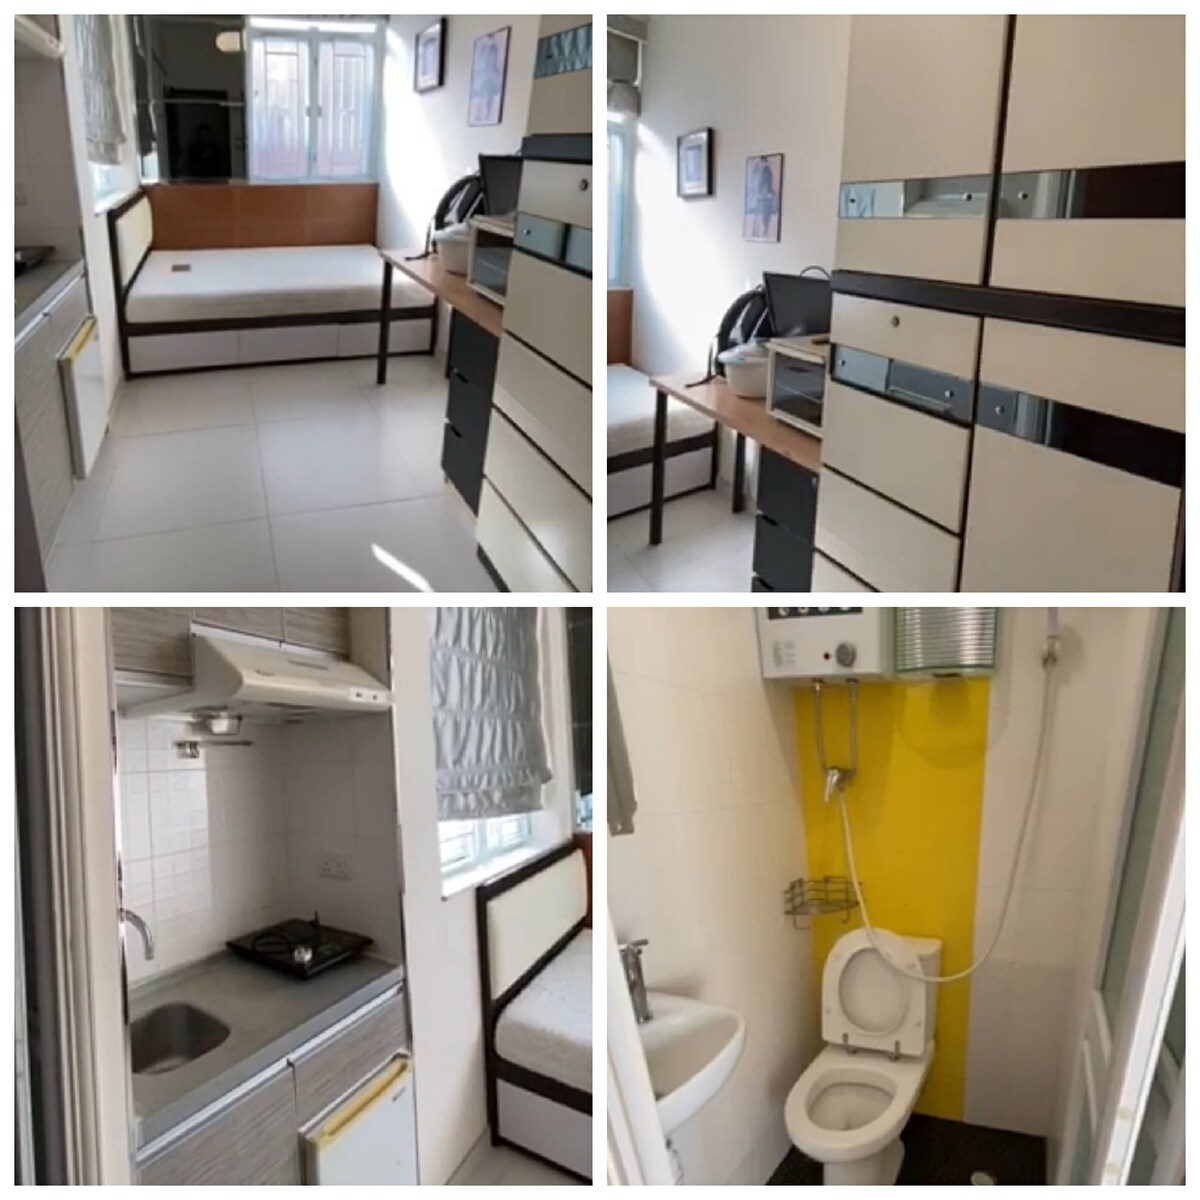 Private and Cozy Room for 2 ppl near MTR - C2